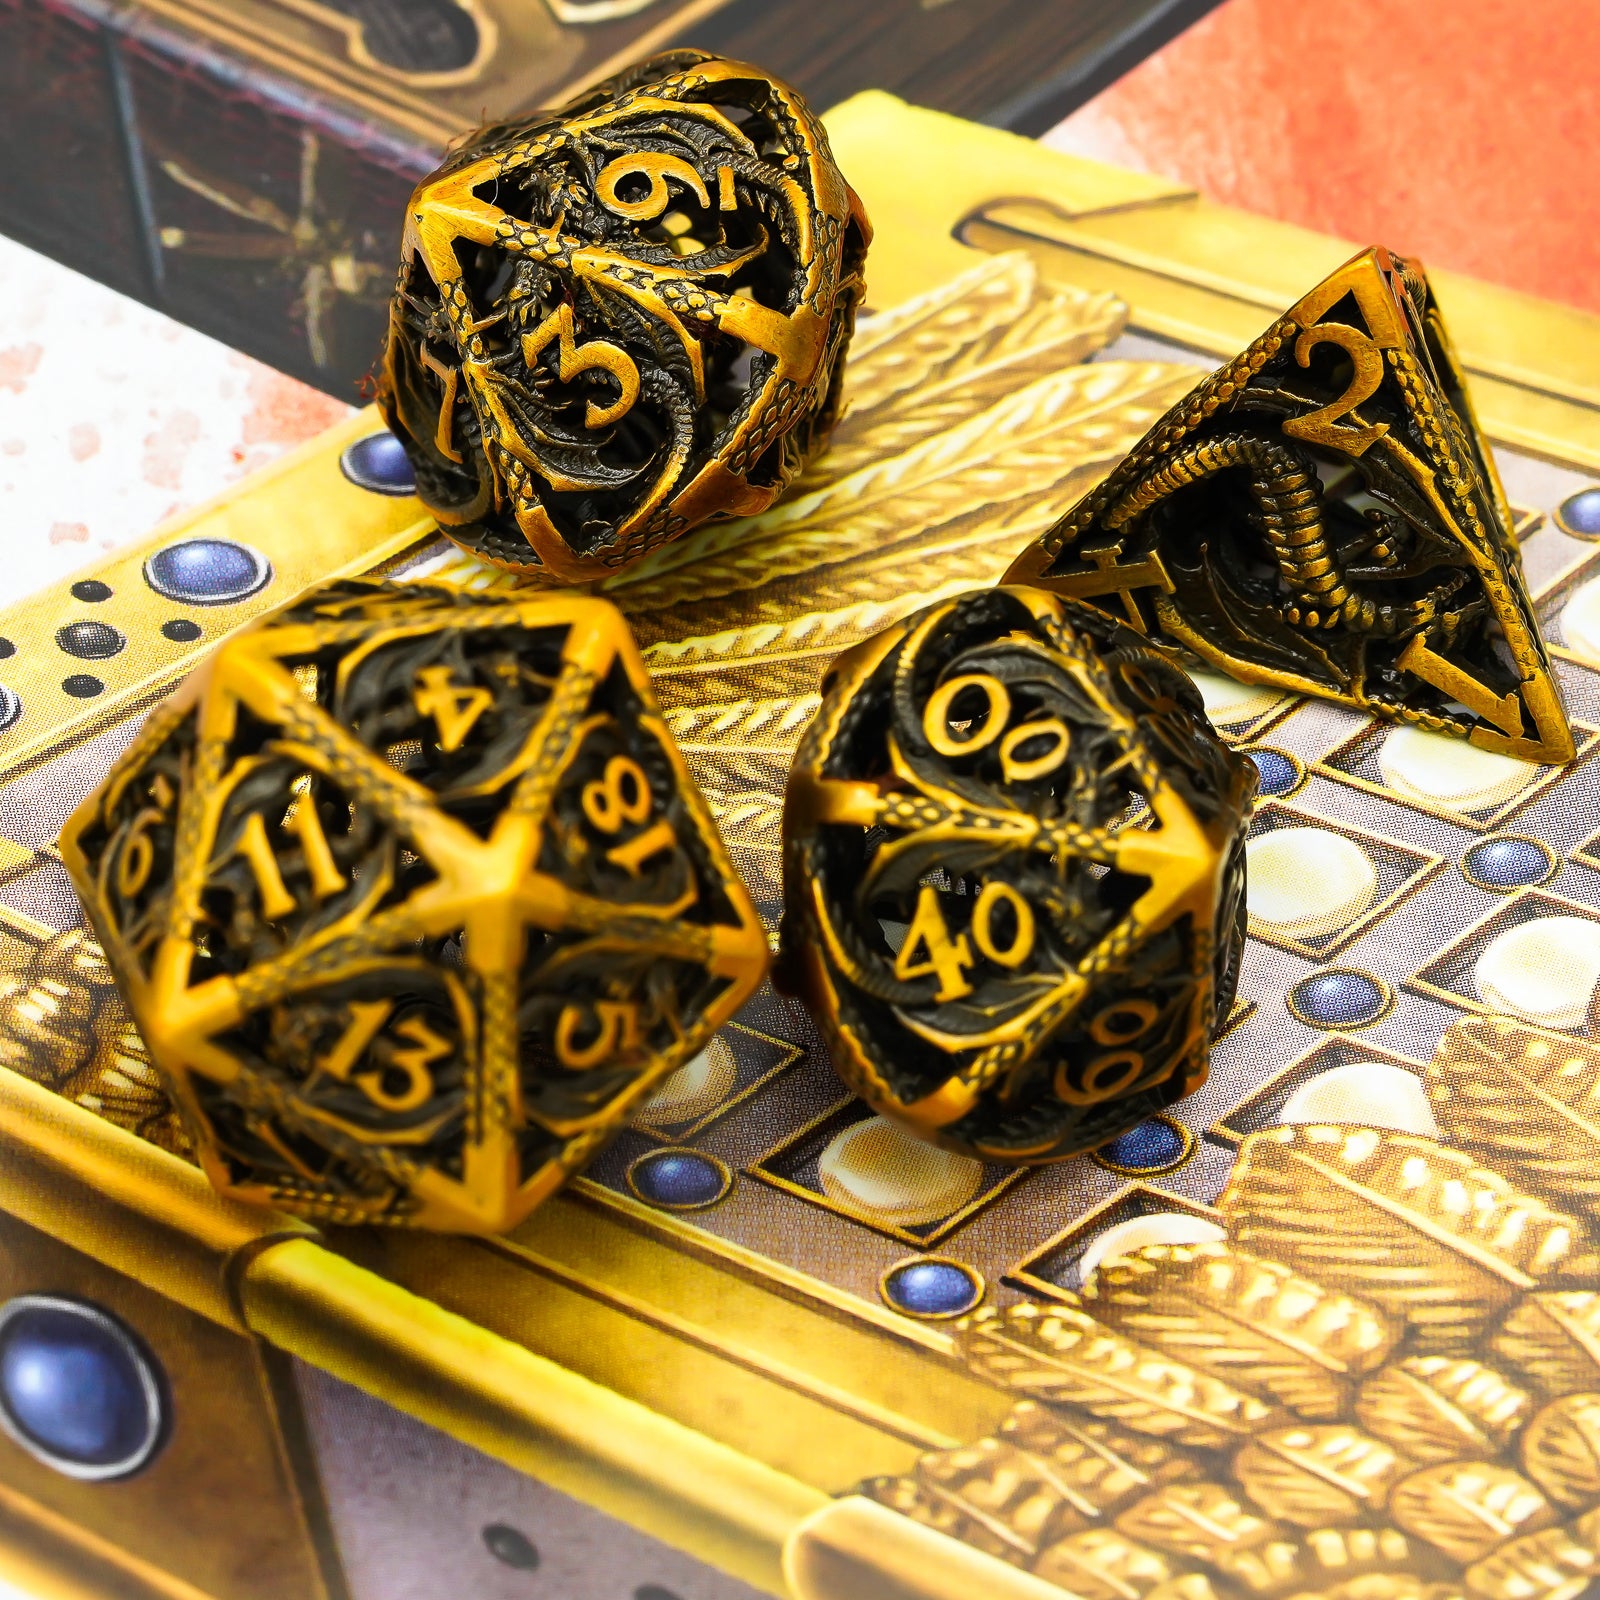 d20, d10, percentage dice and d4 gold DnD dice on dungeon background